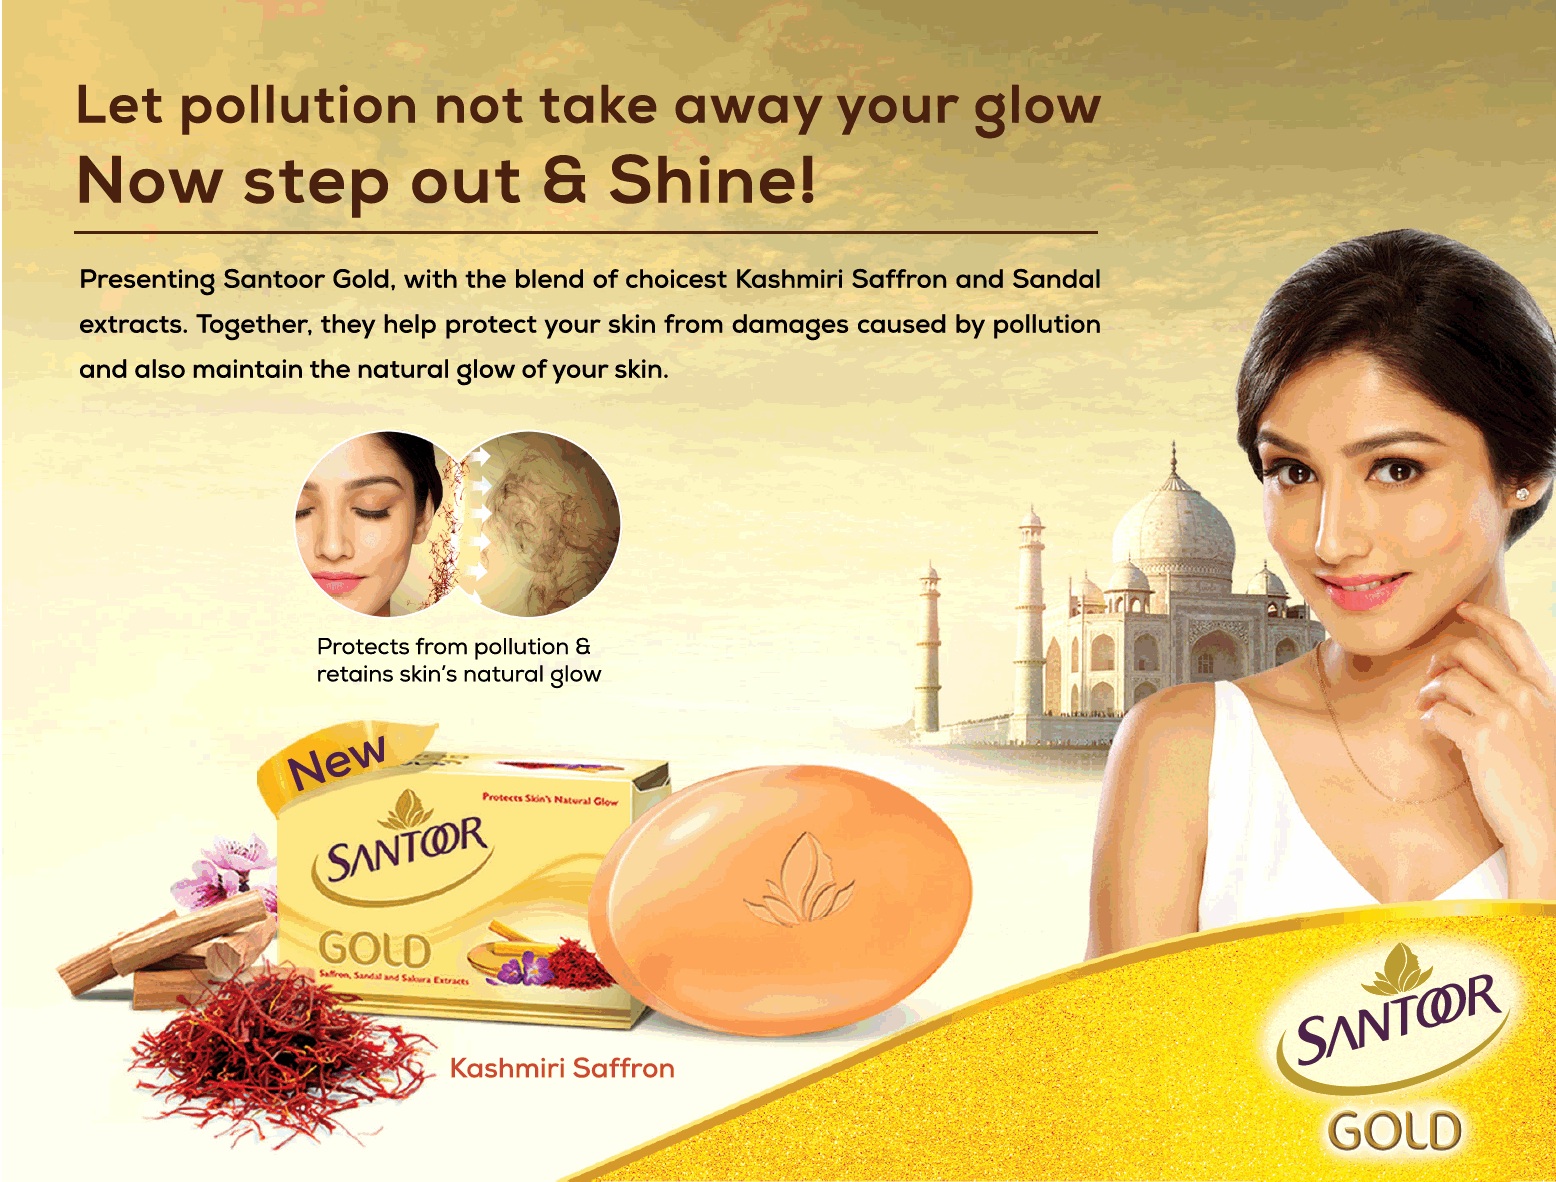 santoor-gold-soap-let-pollution-not-take-away-your-glow-now-stepout-and-shine-ad-bangalore-times-03-03-2019.png